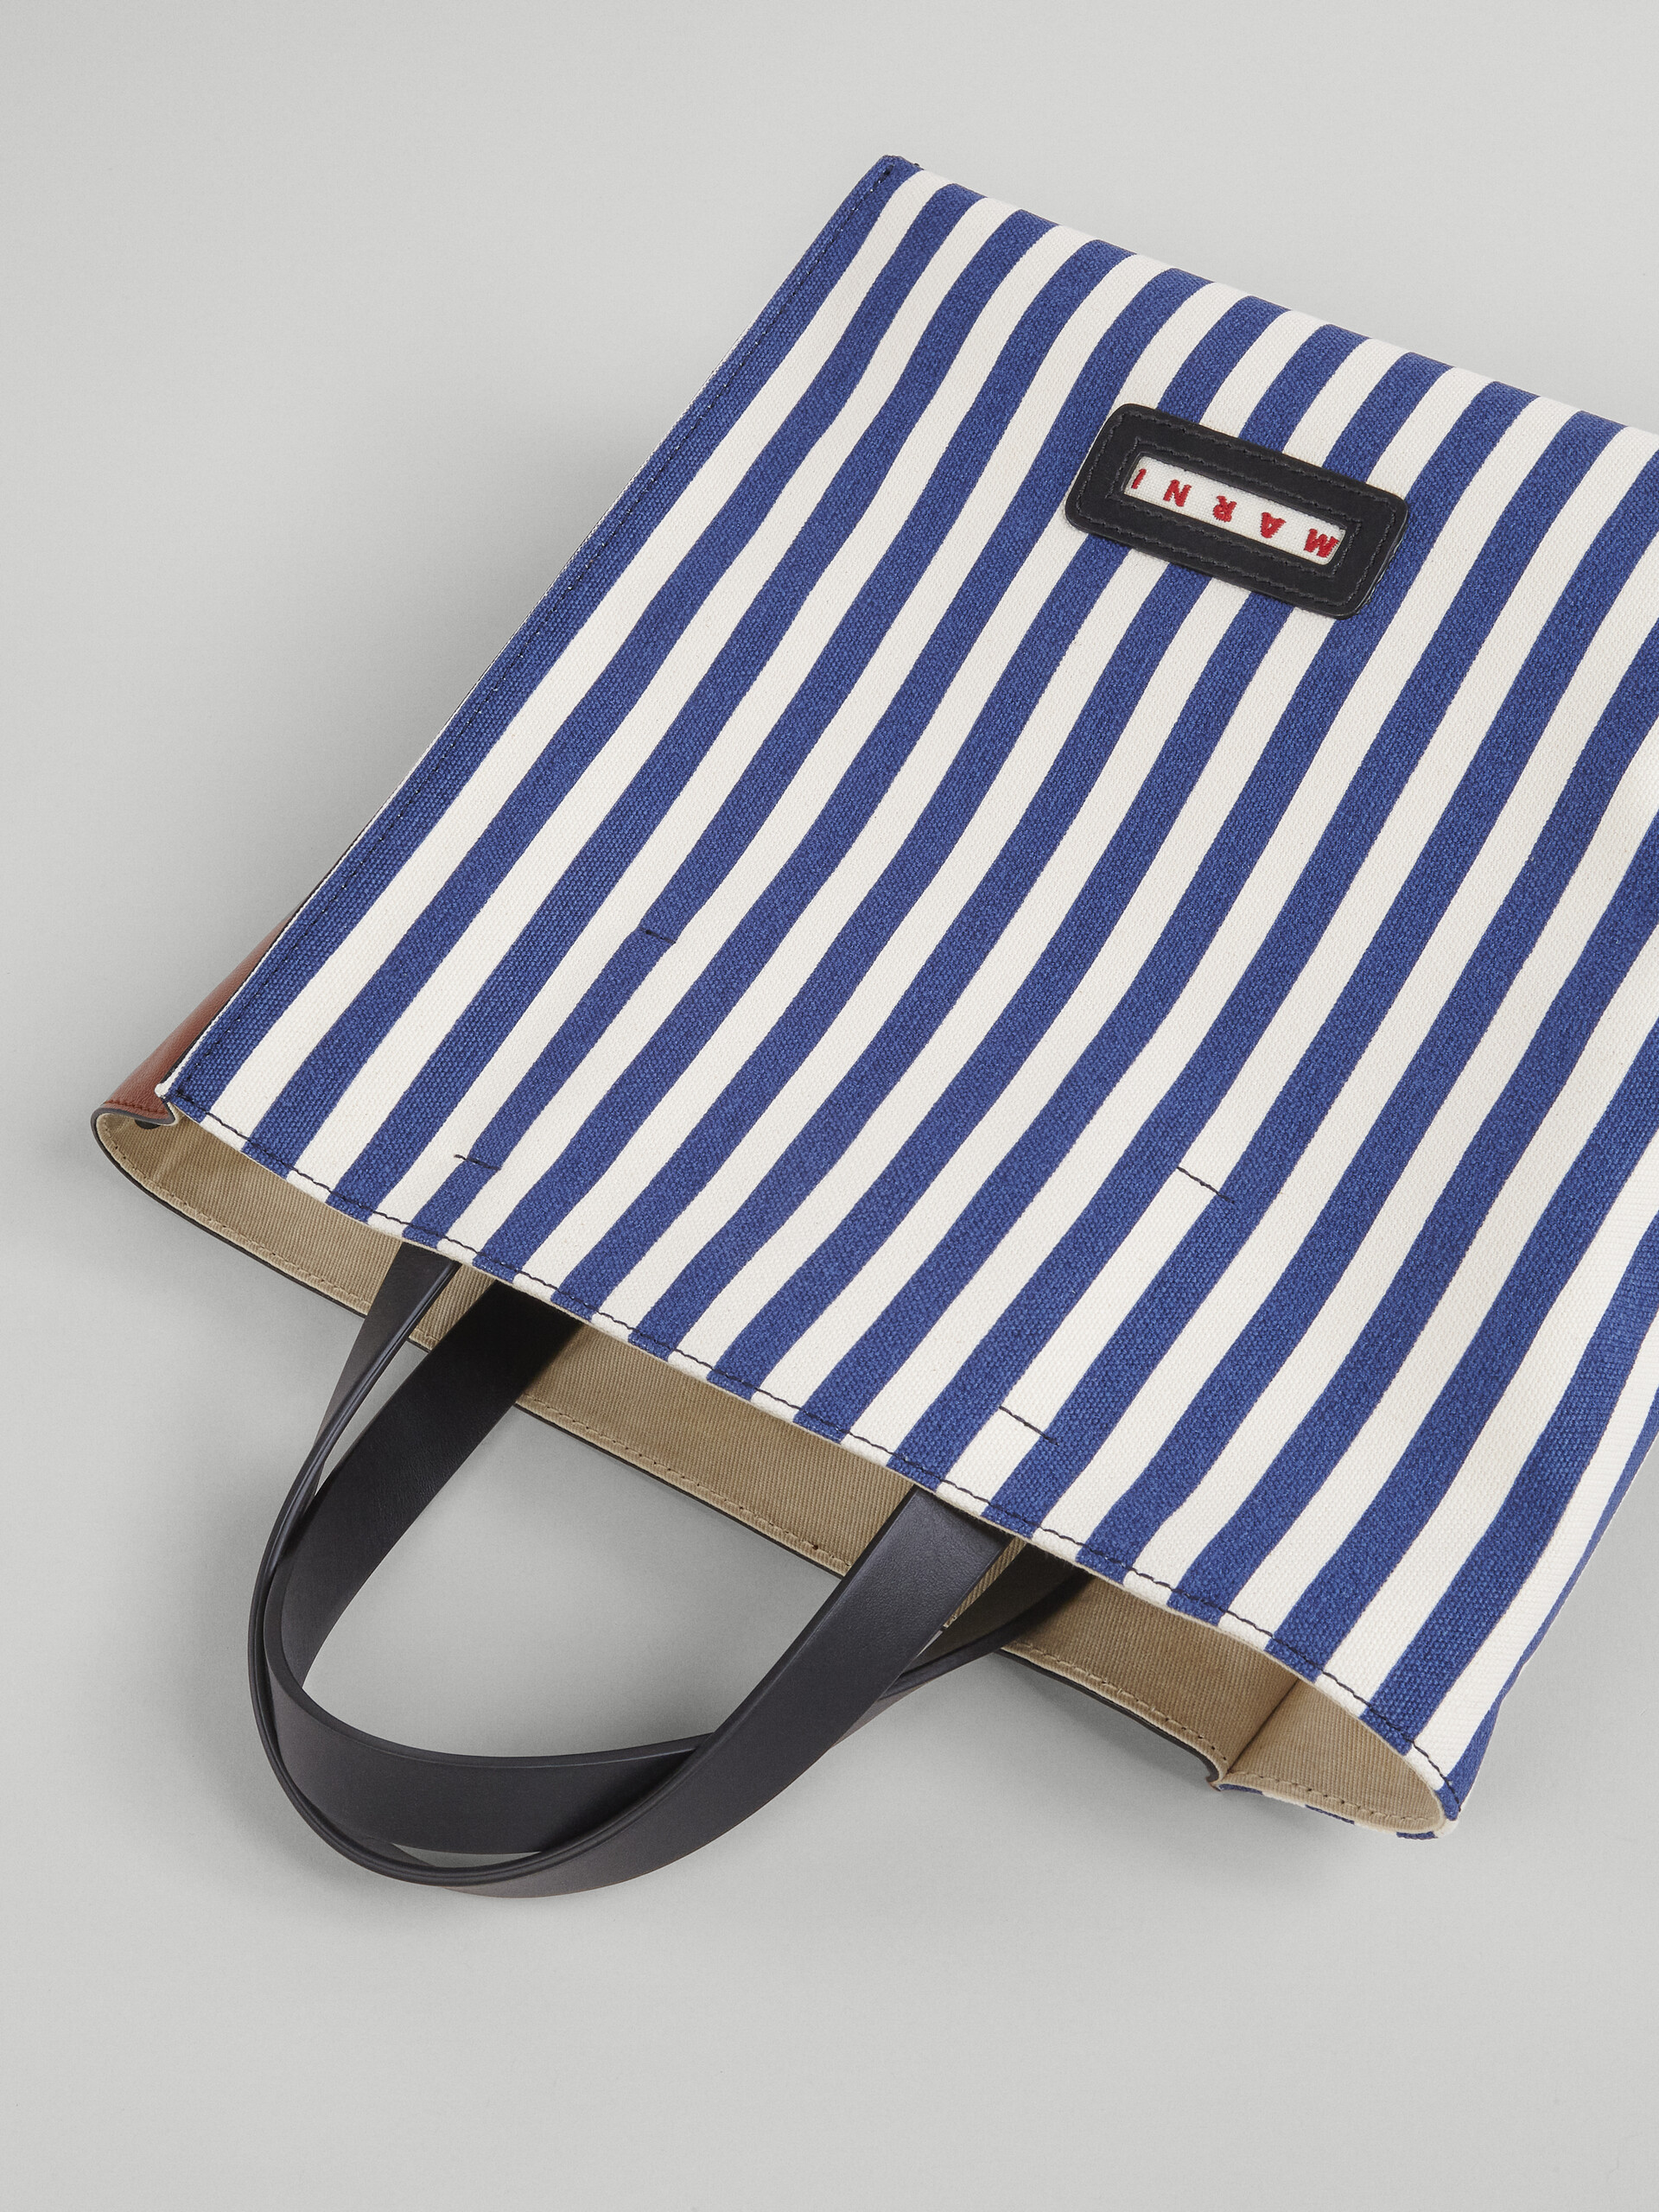 Blue striped canvas and brown calf MUSEO SOFT bag - Shopping Bags - Image 4